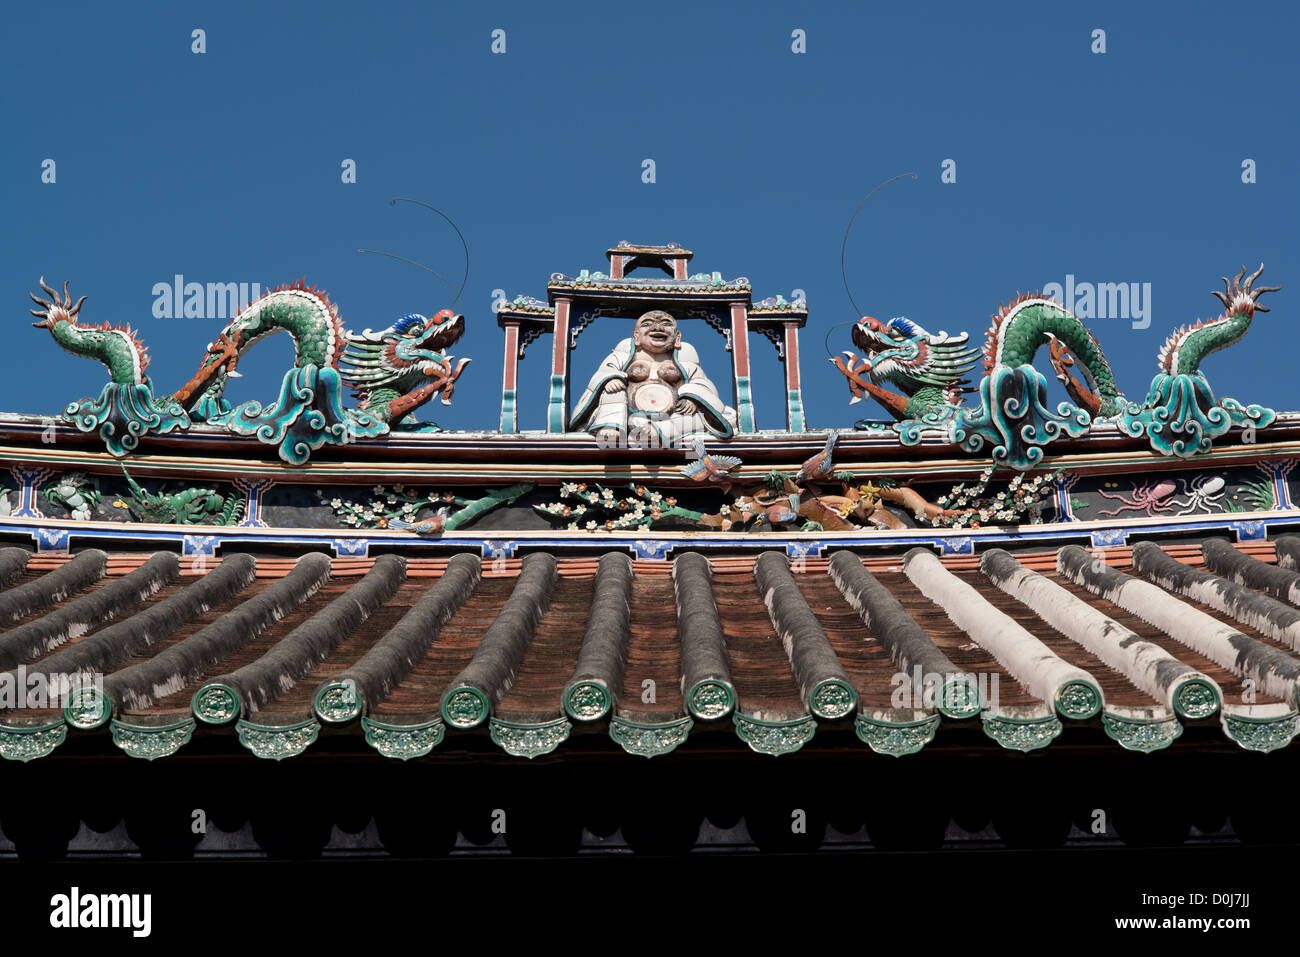 A roof detail of the Han Jiang temple in Georgetown, Penang, Malaysia, showing exquisite porcelain Jian nian craftwork Stock Photo